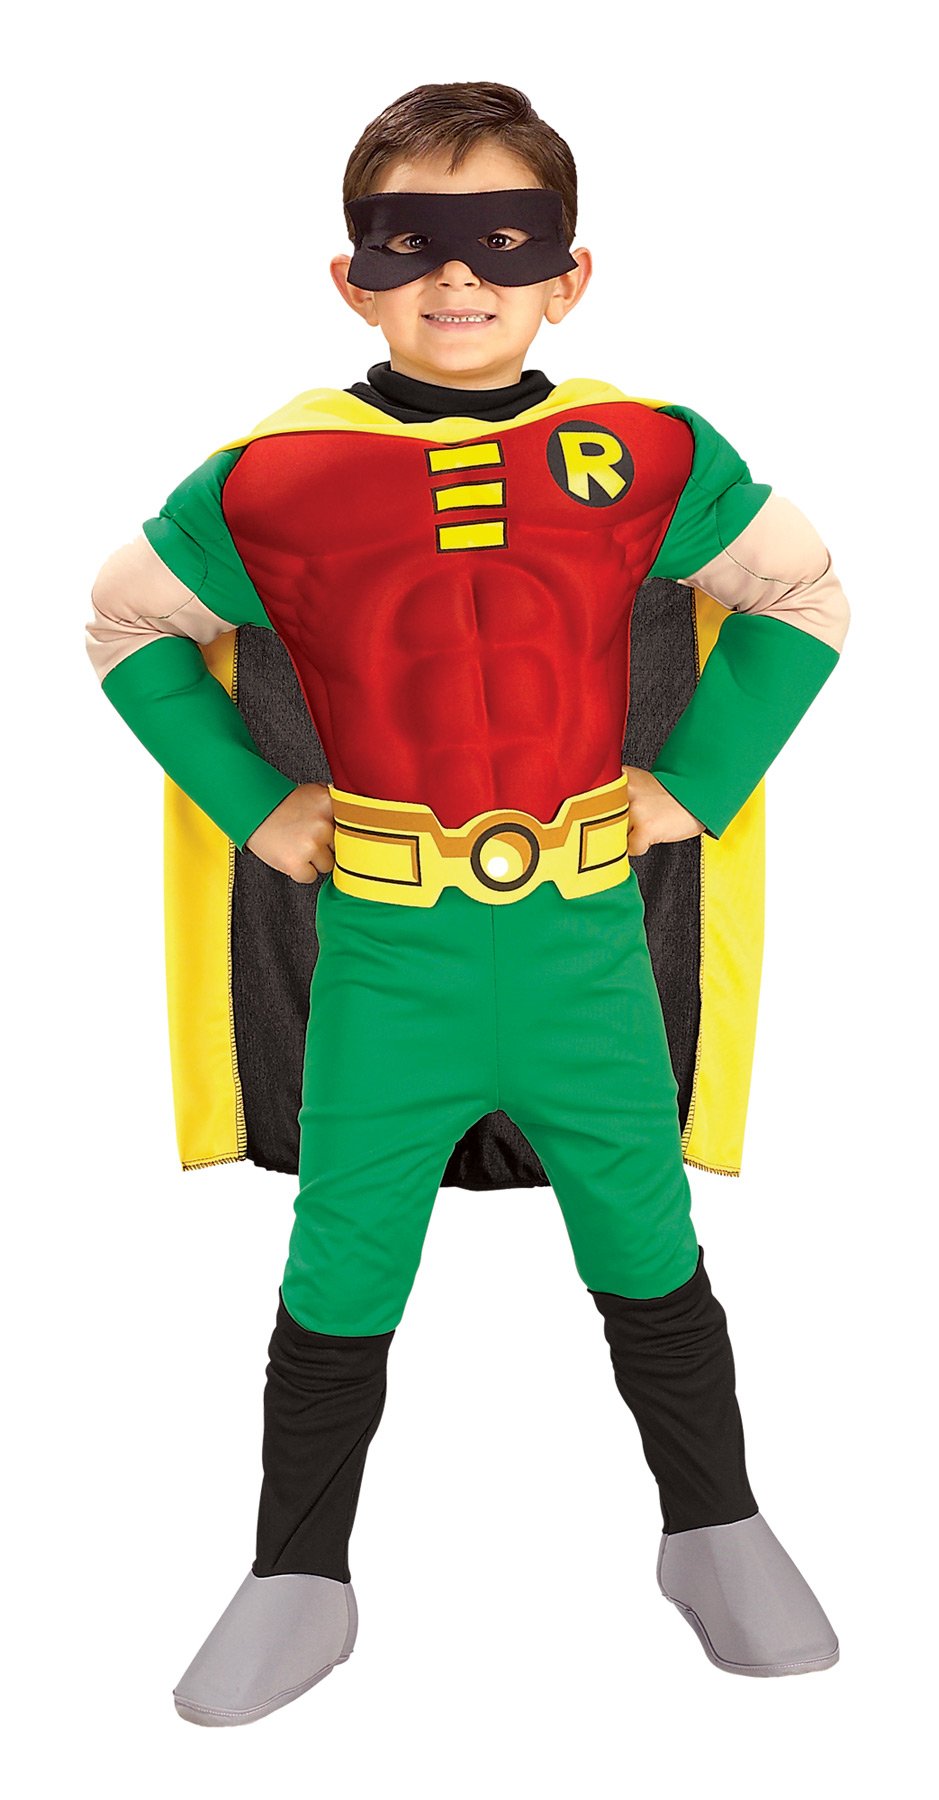 Rubie's Boy's Robin Costume - Large Size 12-14 Years Old